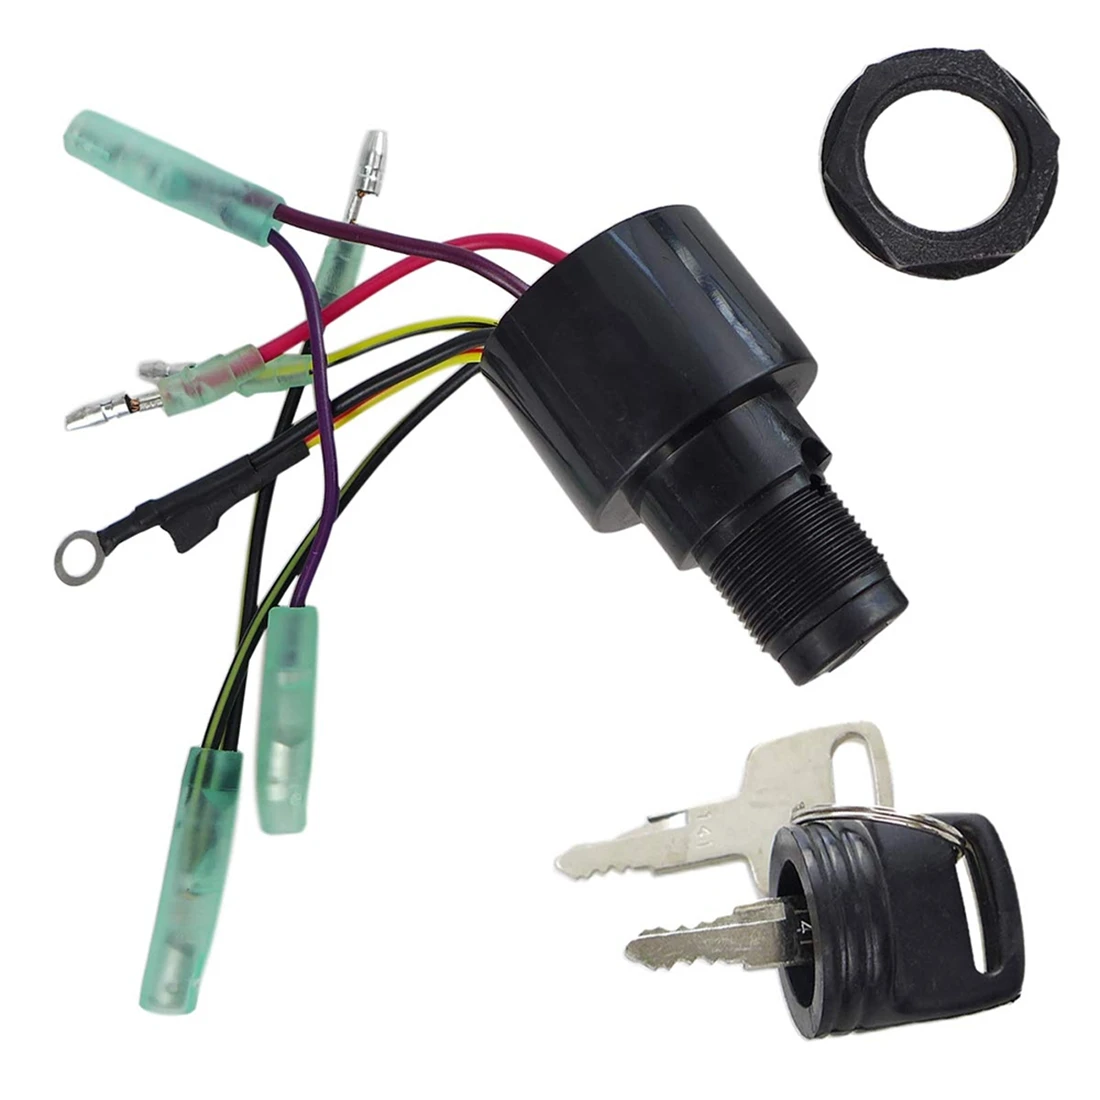 

NEW-87-17009A5 Boat Motor Ignition Key Switch for Mercury Outboard Motors 3 Position Off-Run-Start